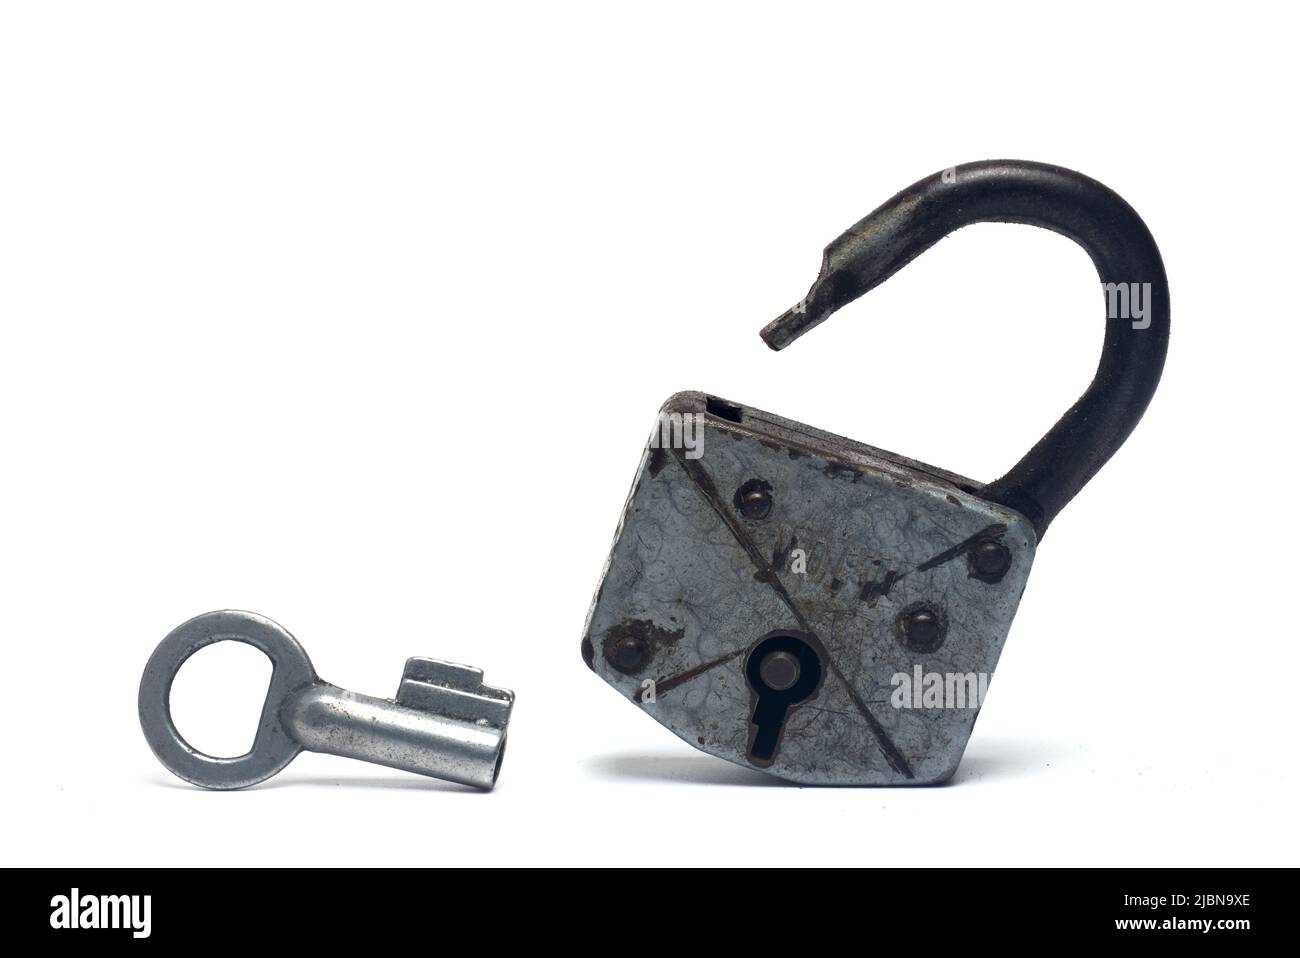 Closeup of silver old shackle U-lock on white background with silver key standing next to it Stock Photo